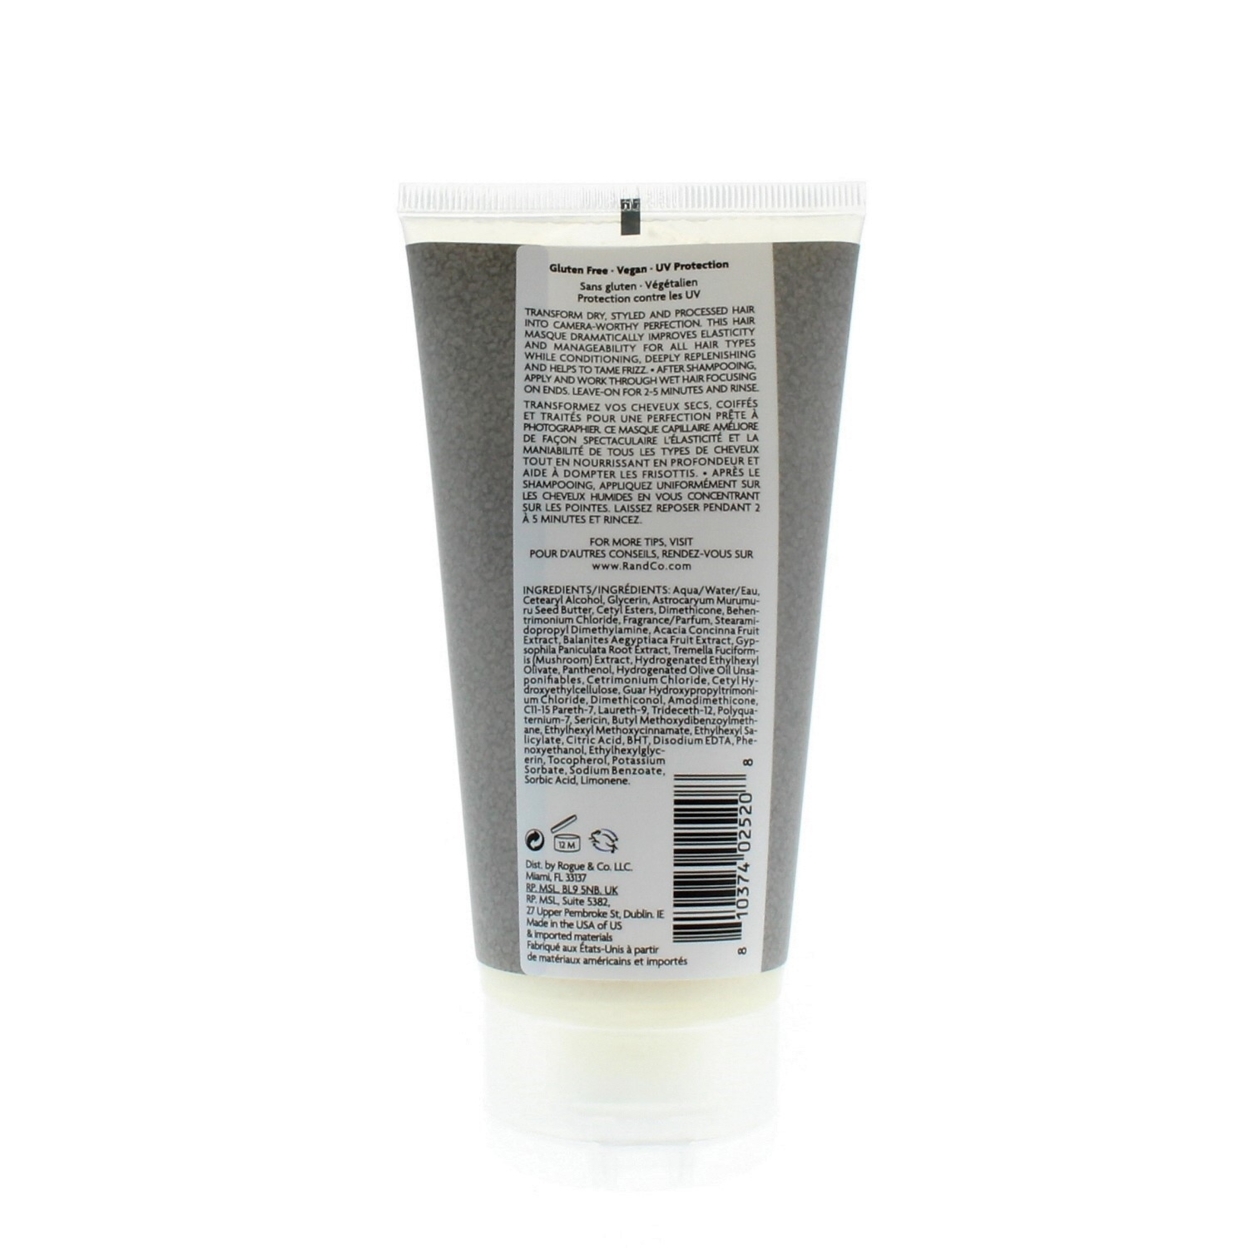 R+Co Television Perfect Hair Masque, 5 oz Masque - image 3 of 3